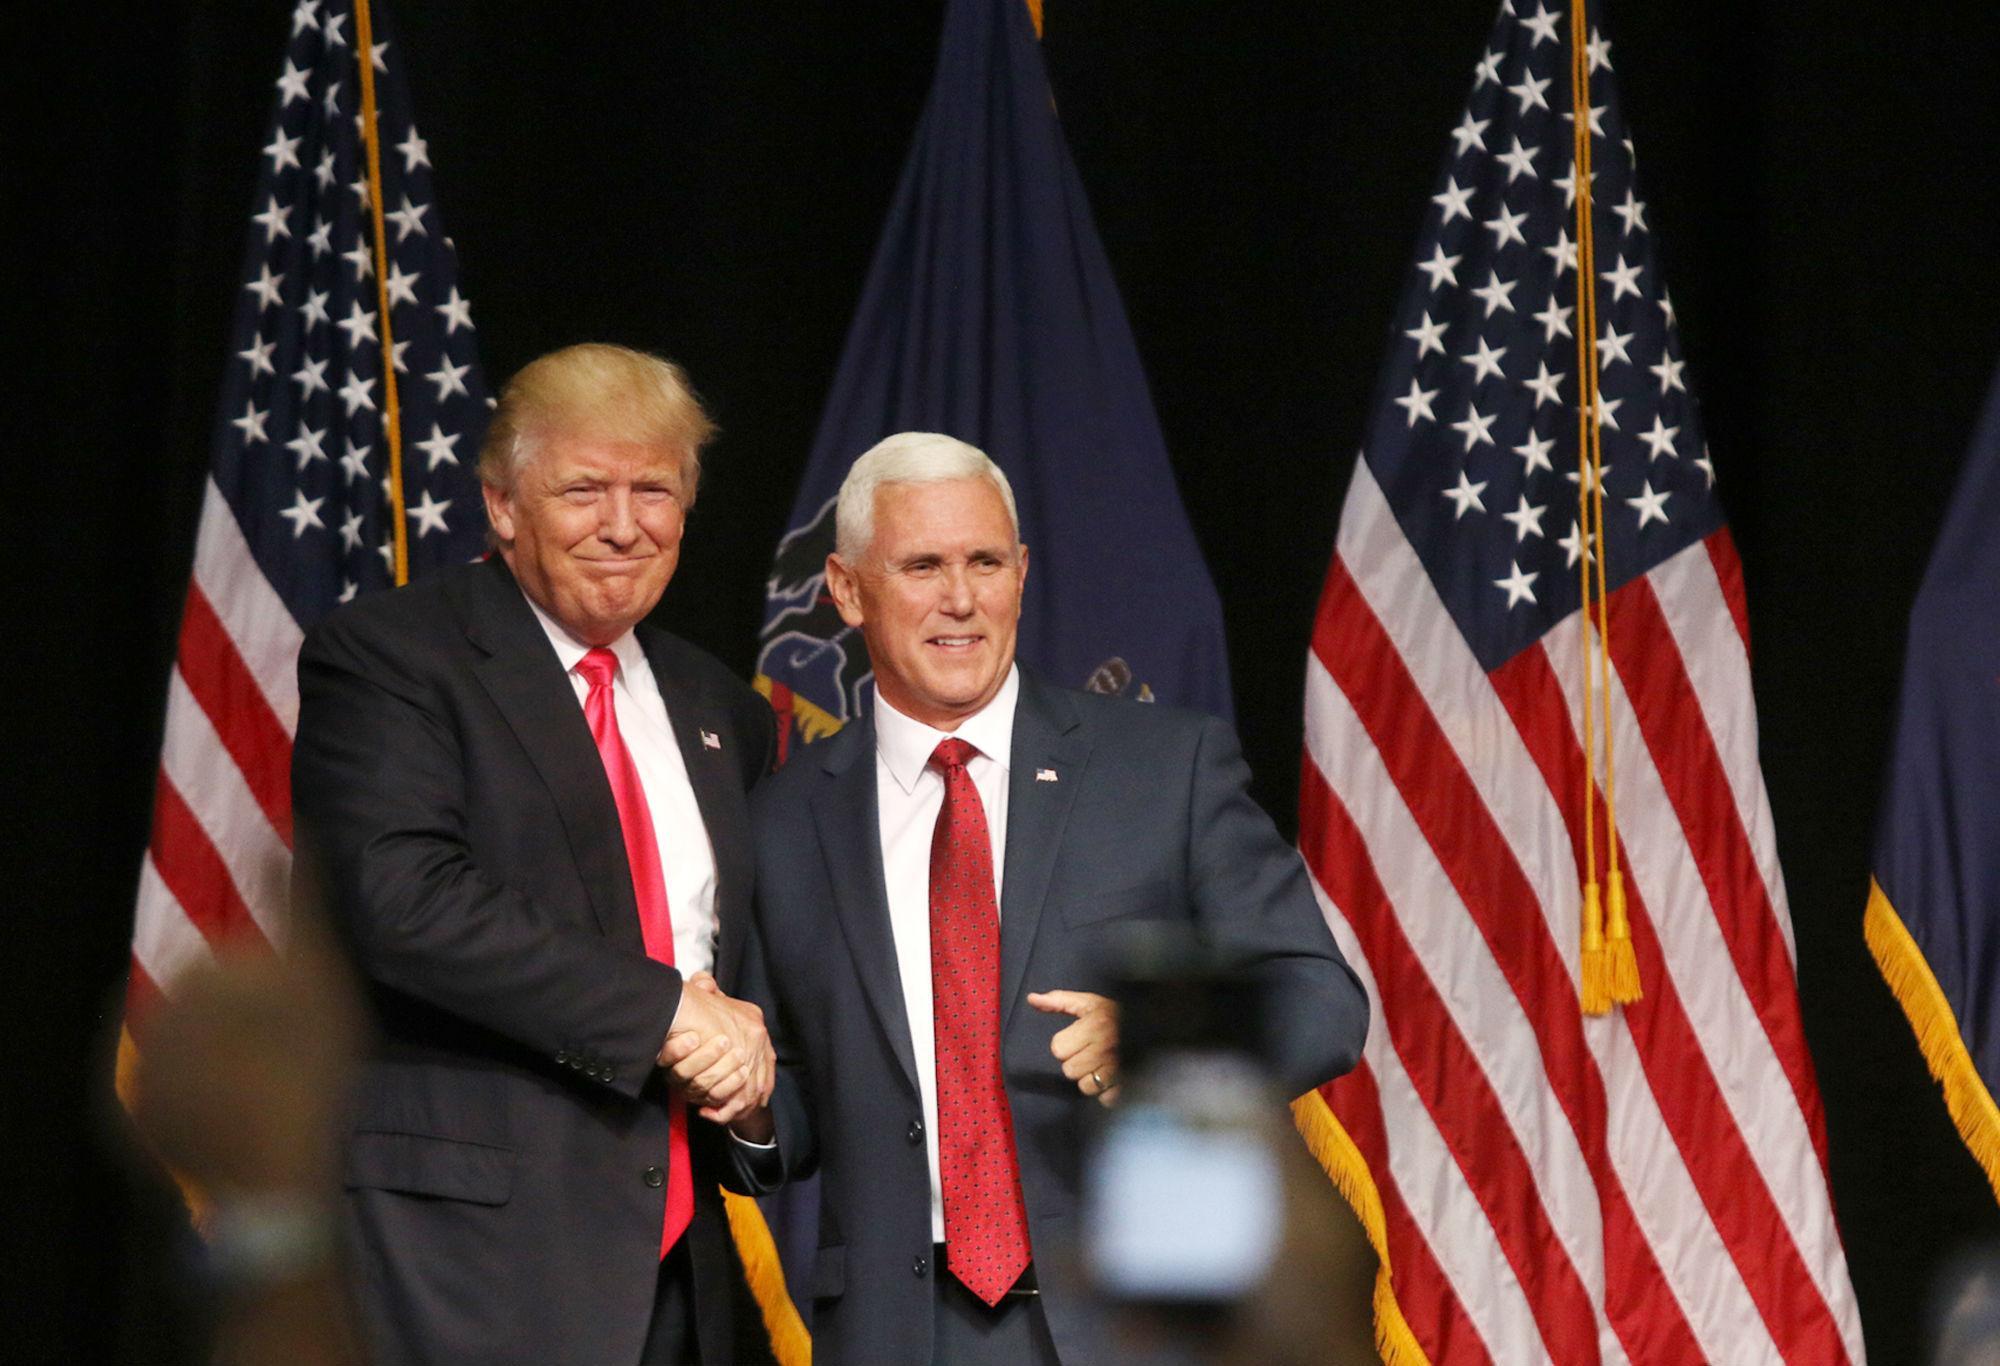 Mike Pence (right) insists he stands shoulder to shoulder with Donald Trump